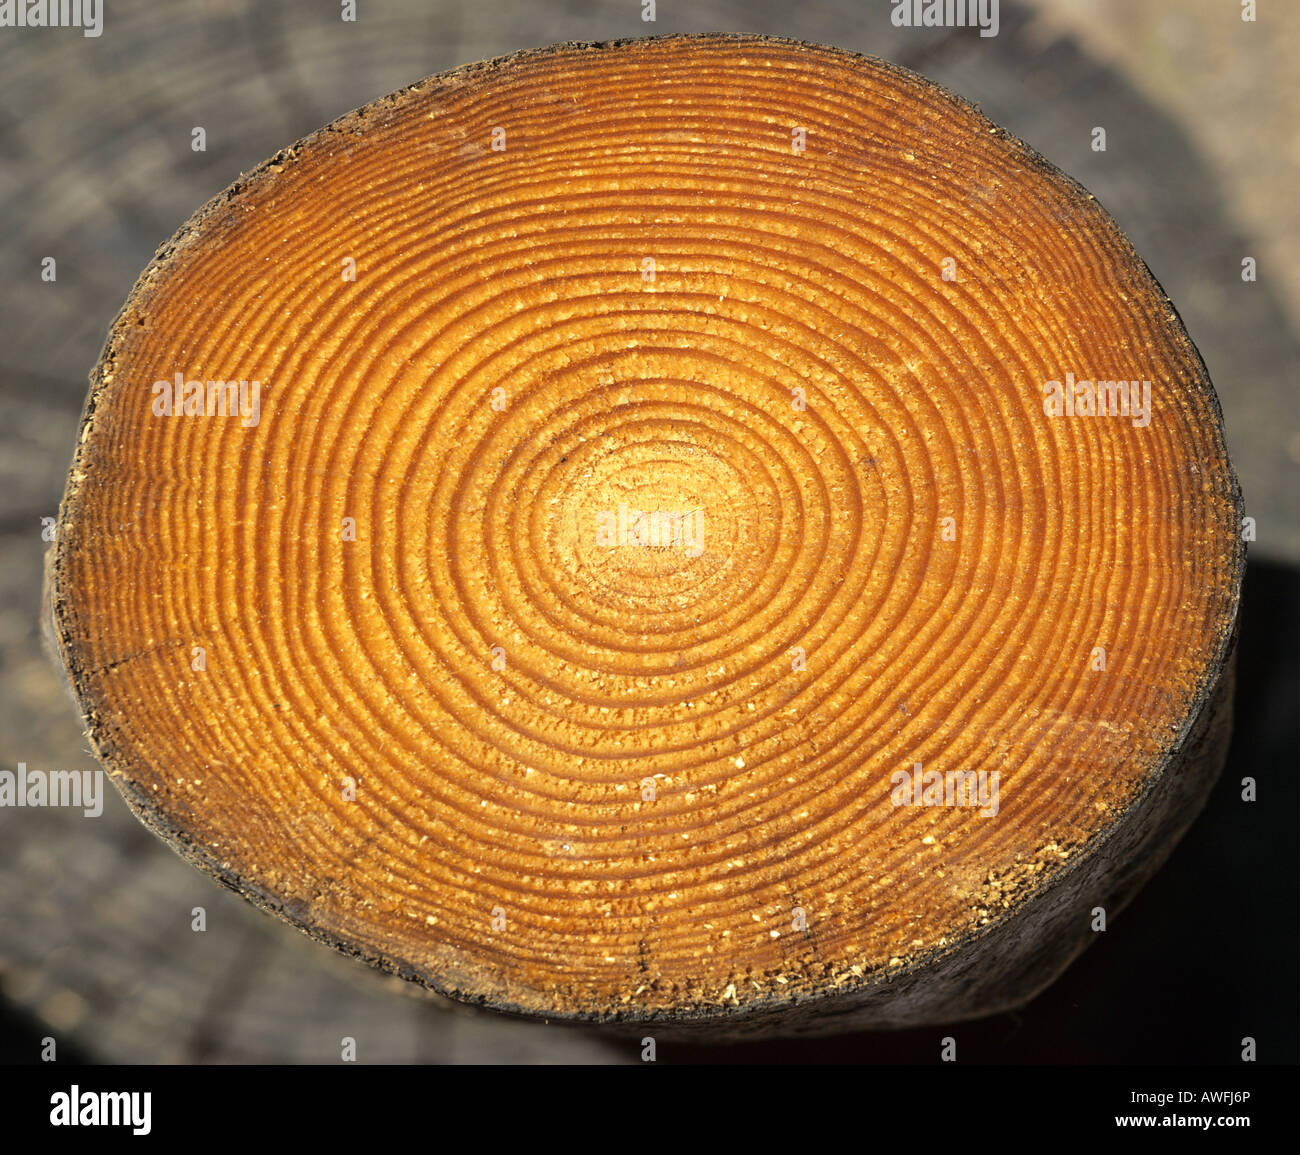 GIANT PLAYGROUND COUNTING TREE RINGS